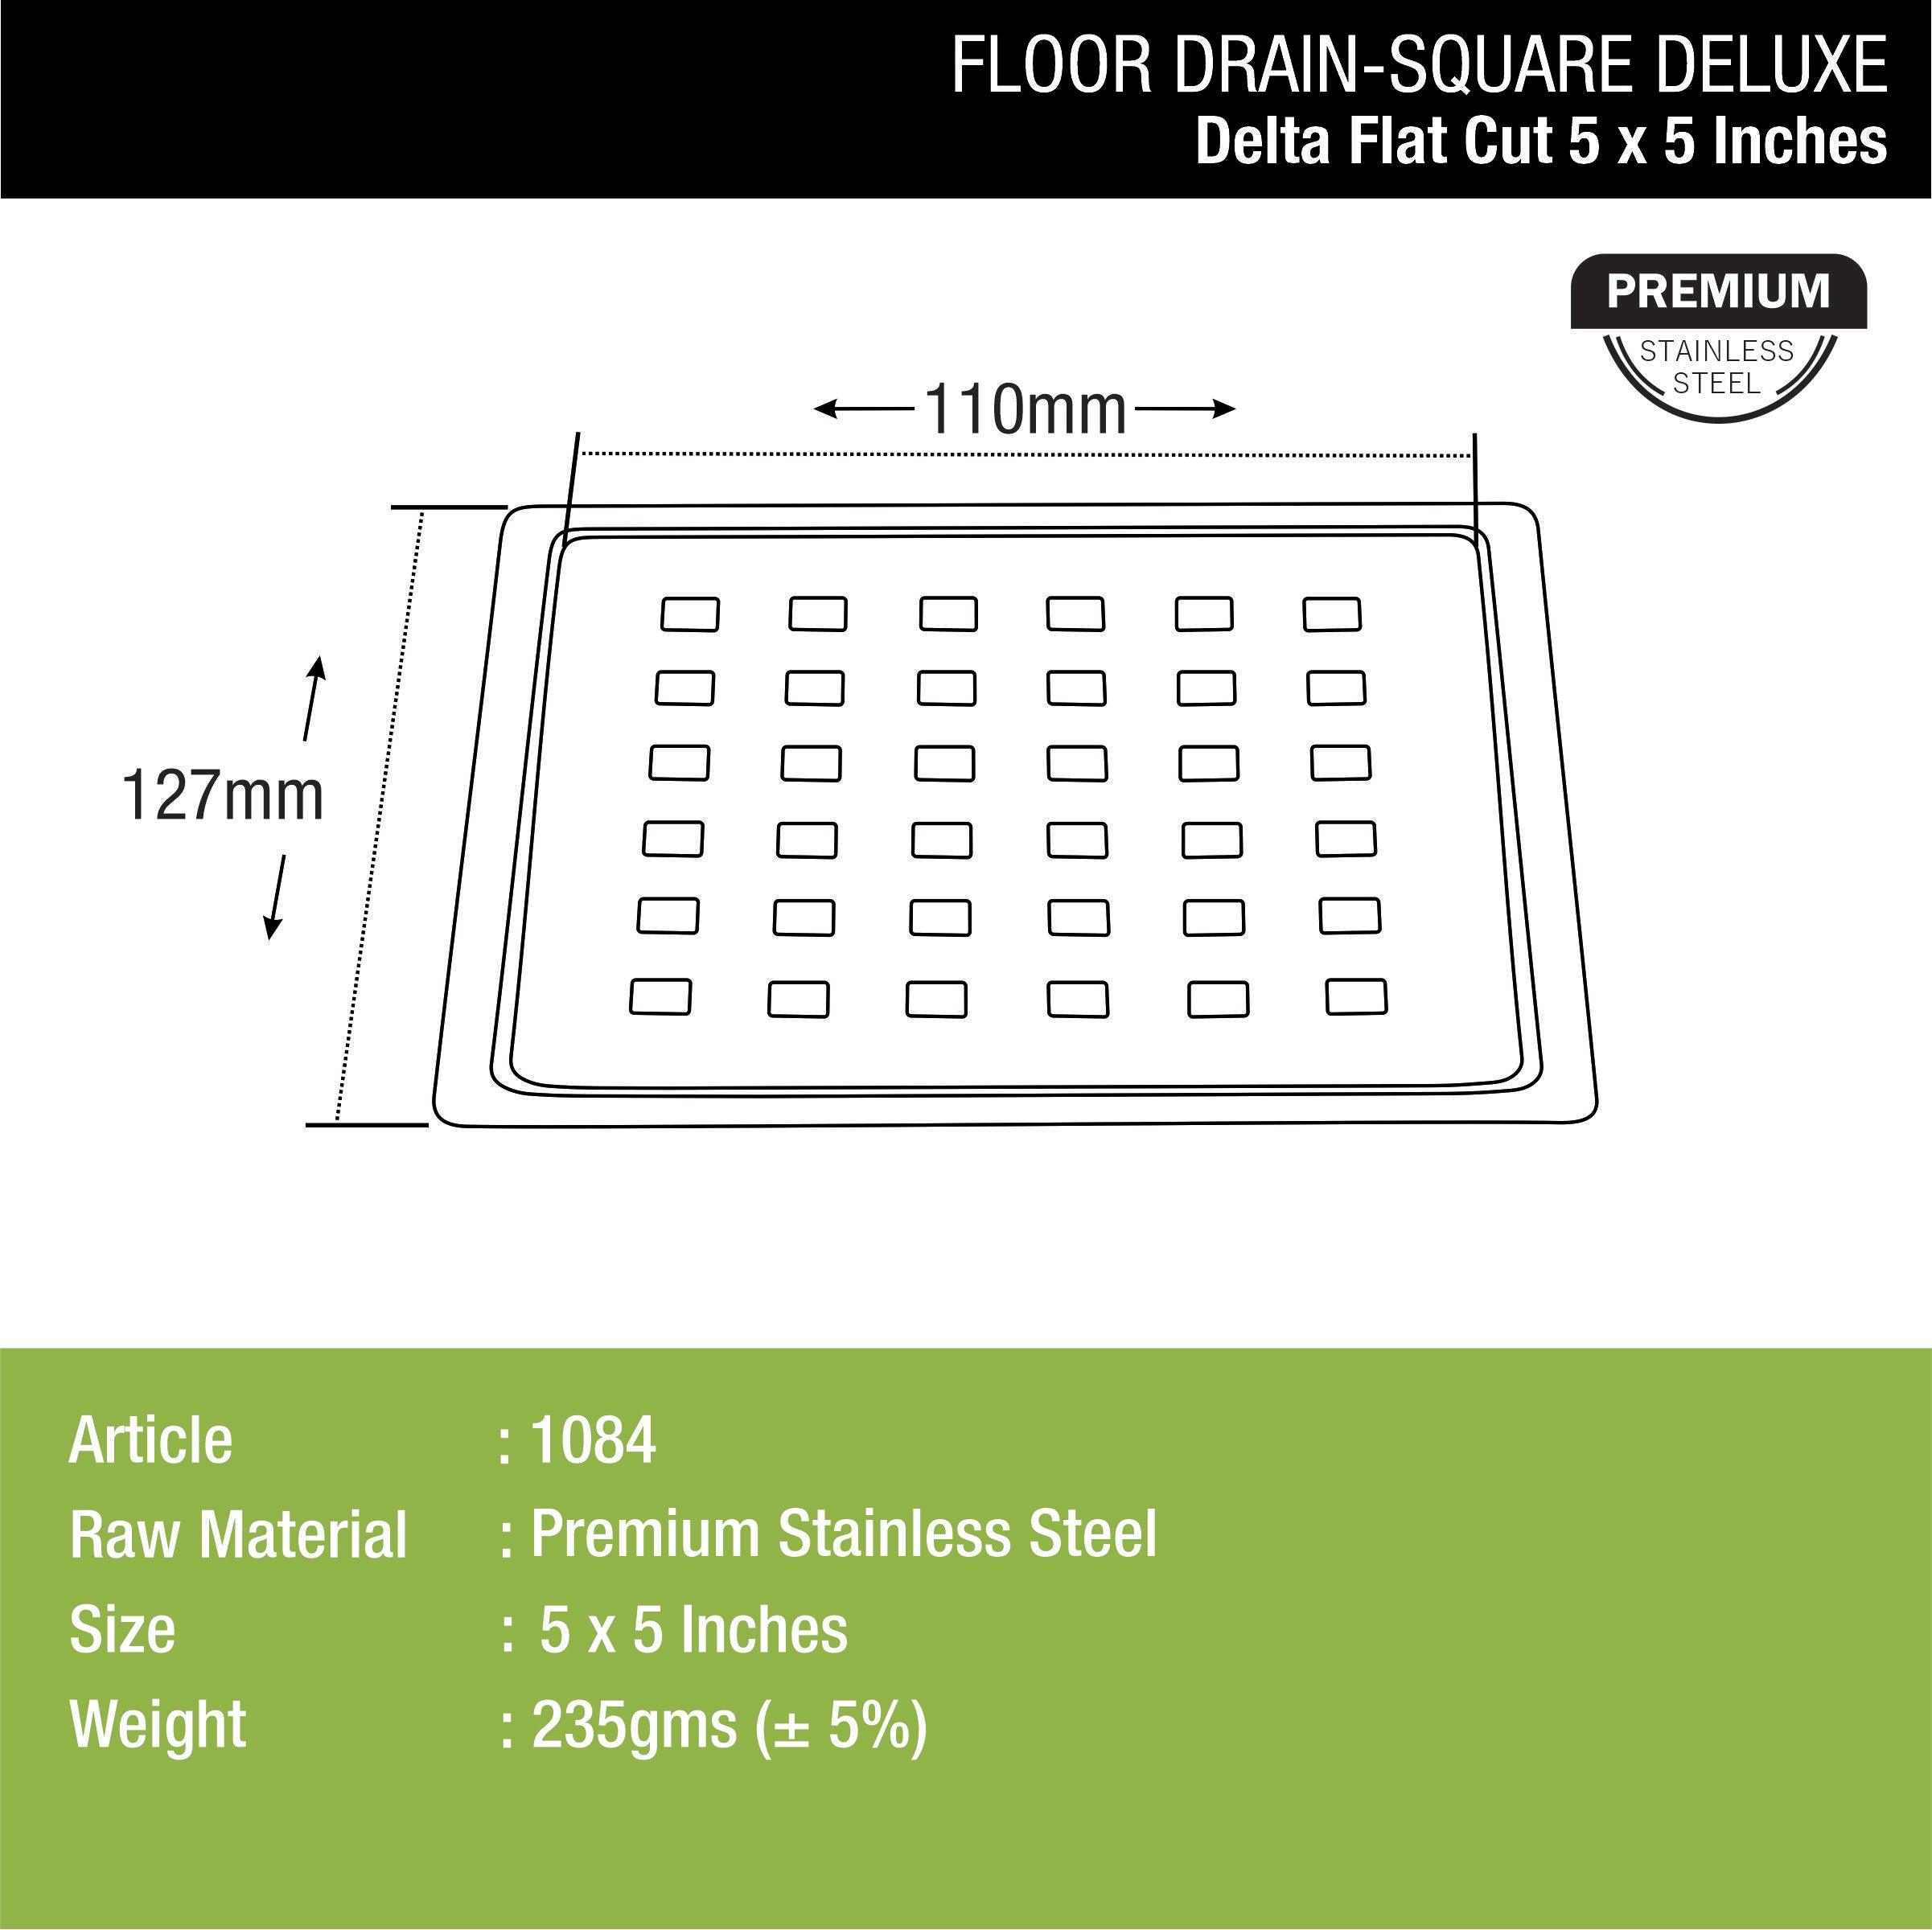 Delta Deluxe Square Flat Cut Floor Drain (5 x 5 Inches) dimensions and sizes